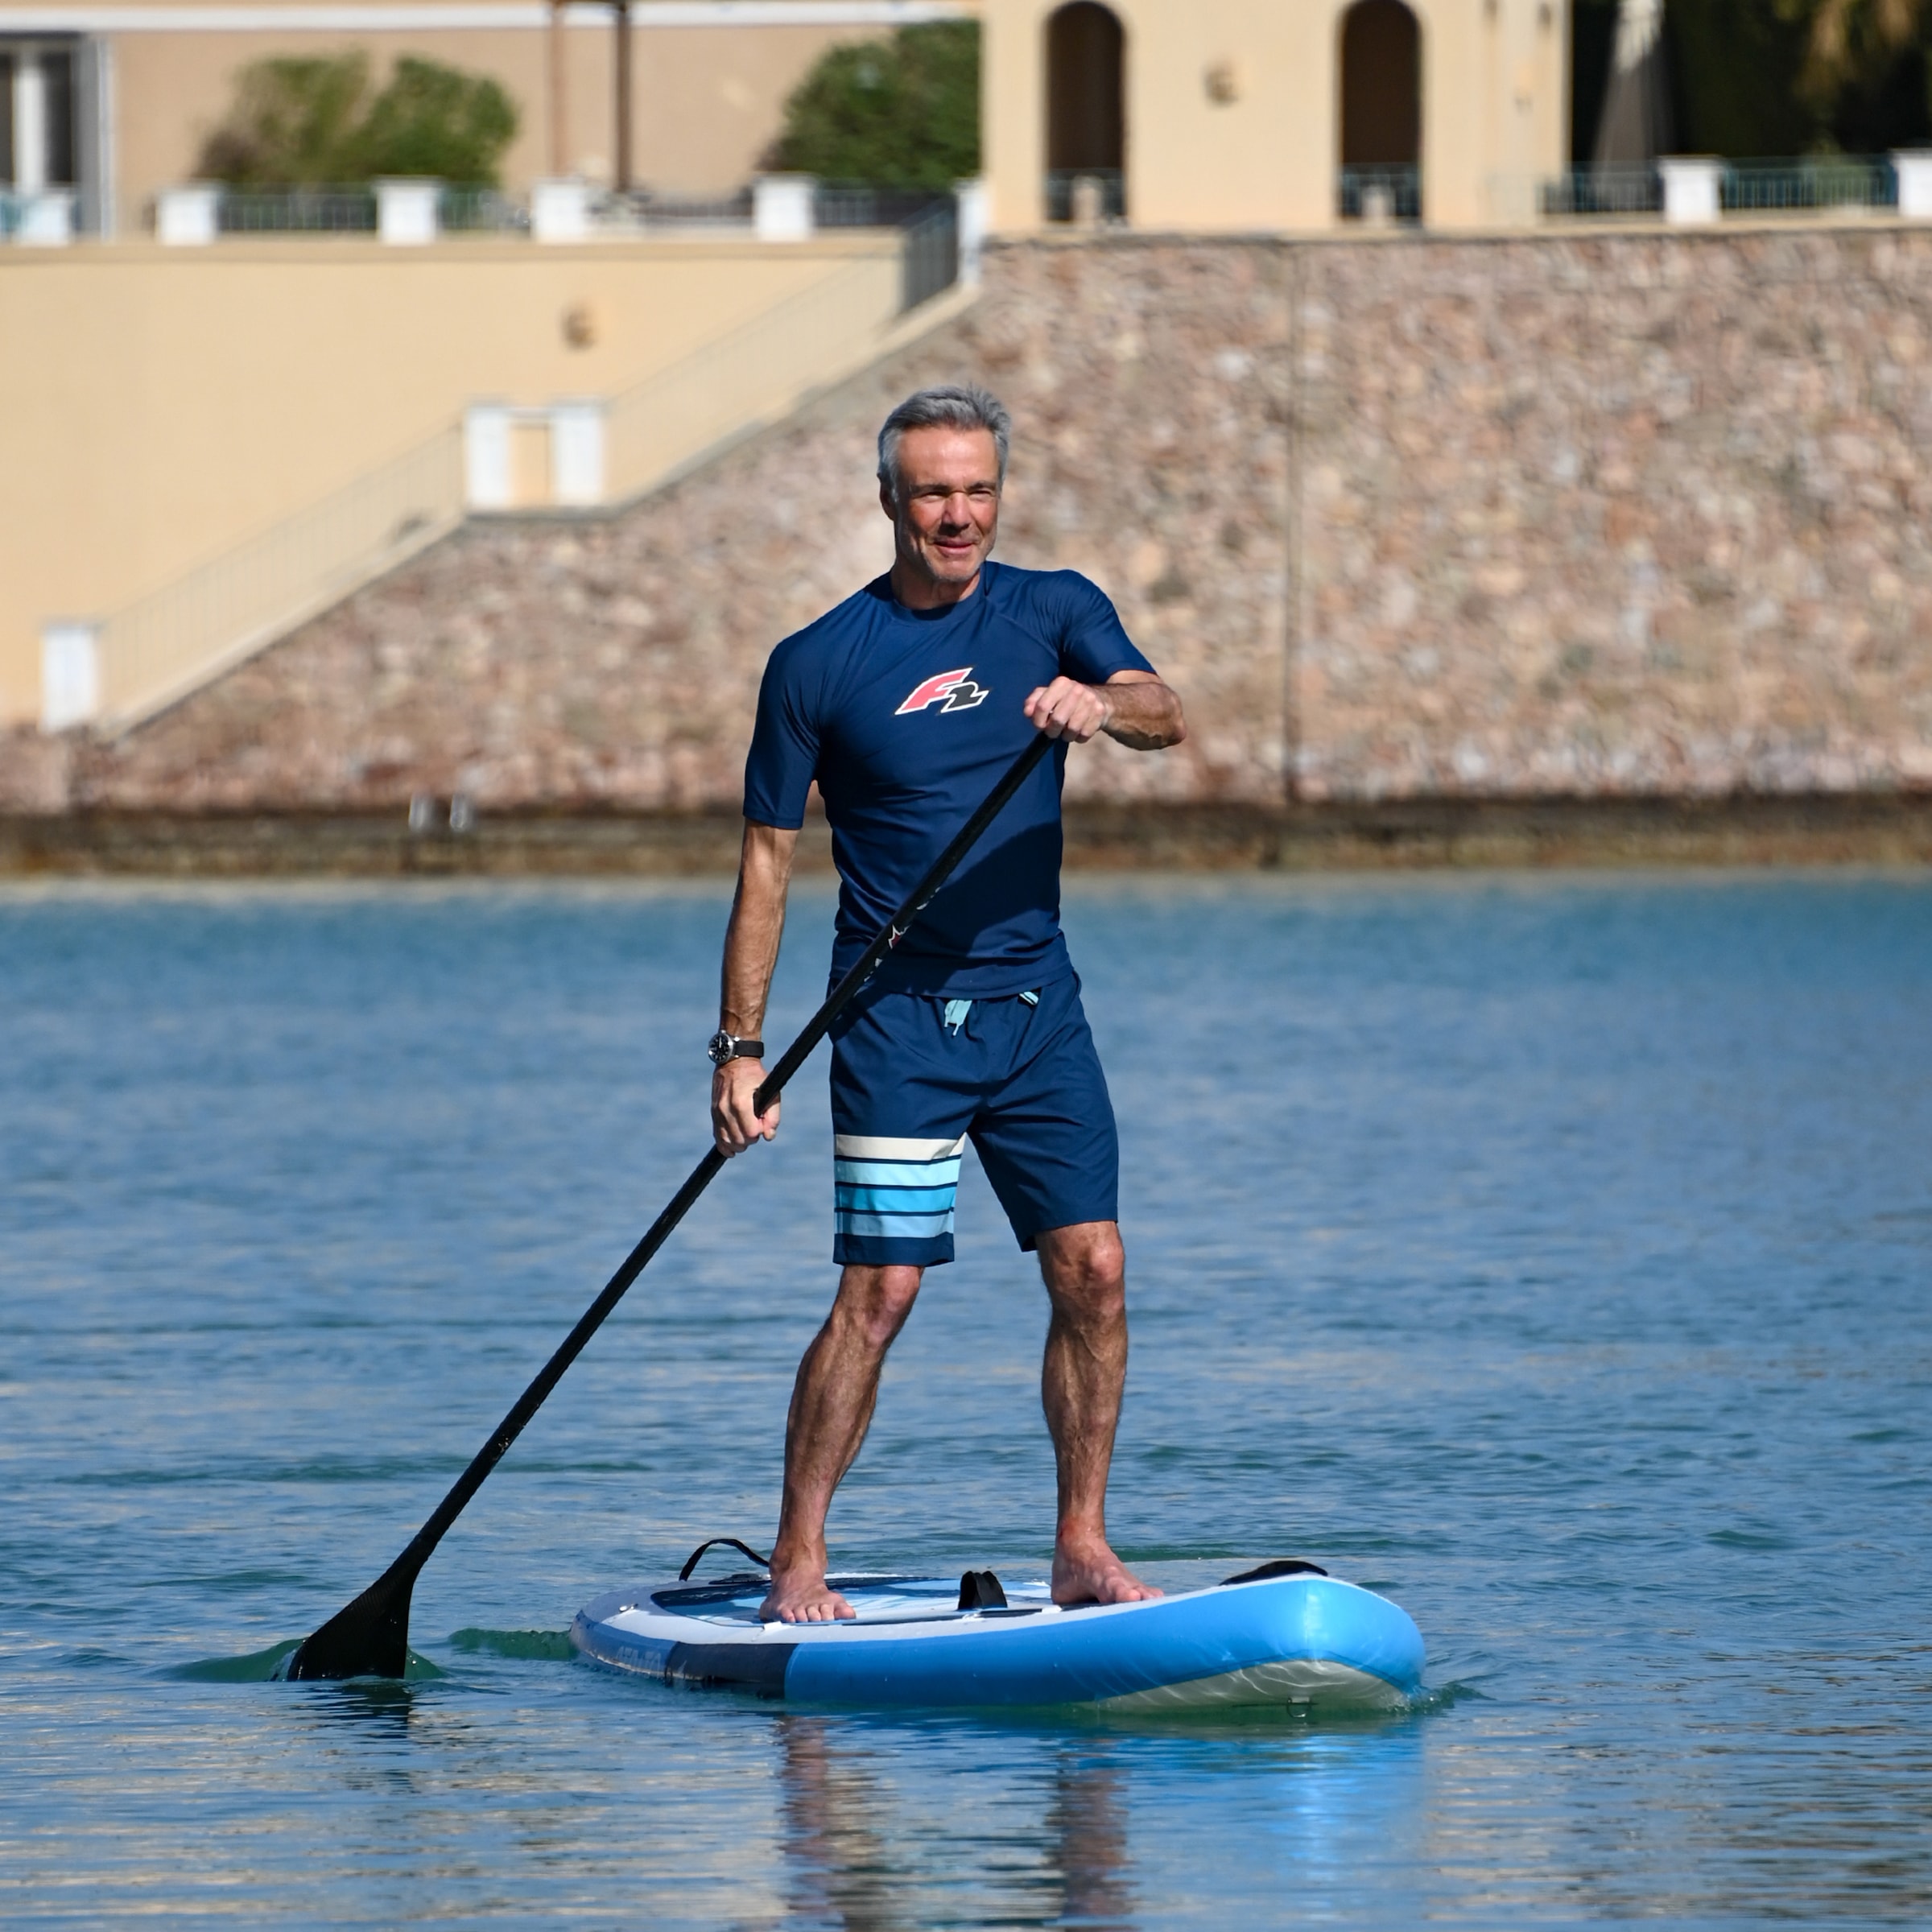 F2 SUP-Board »Feel Free«, online Up Paddling Stand kaufen